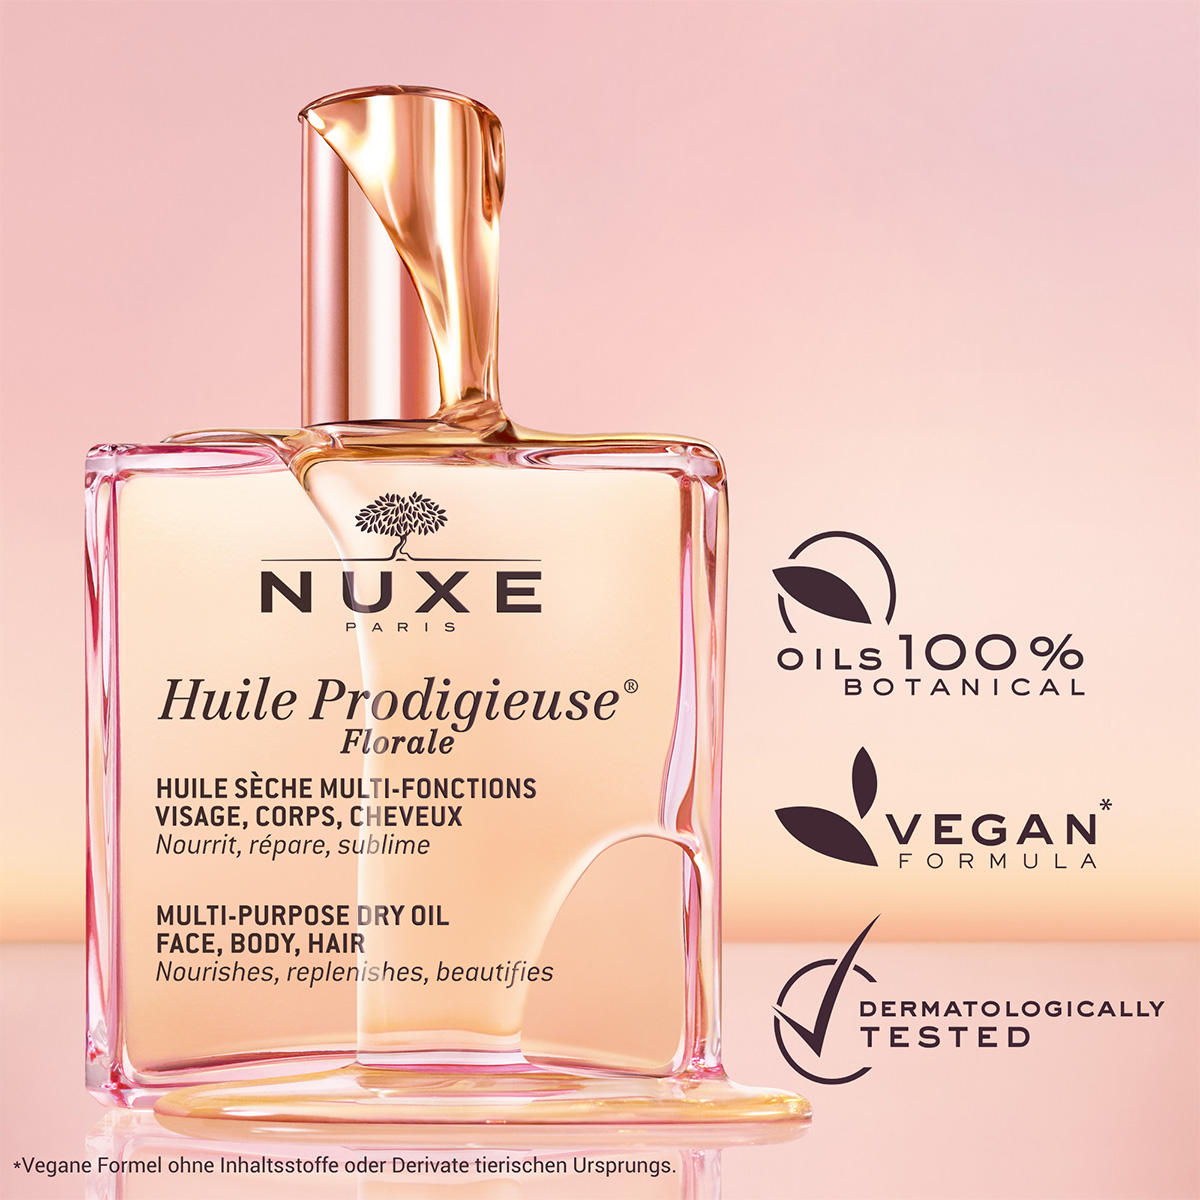 NUXE Huile Prodigieuse Floral Drying Oil + Shampoo Set  - 4